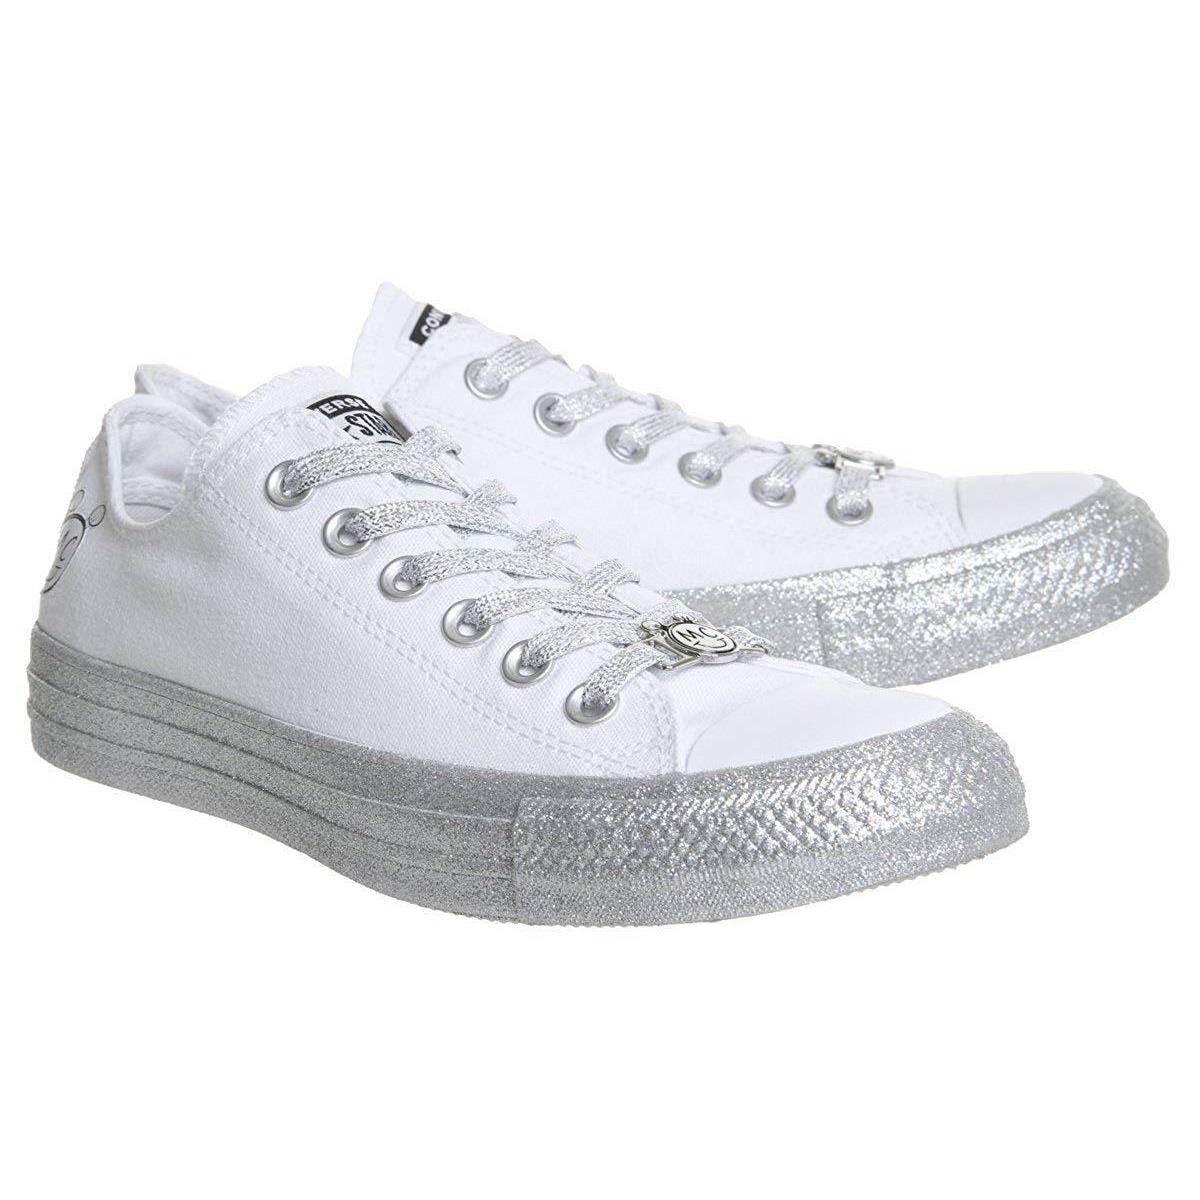 Converse Chuck Taylor All Star Miley Cyrus Sneaker White Platinum Shoe Size 10 - White